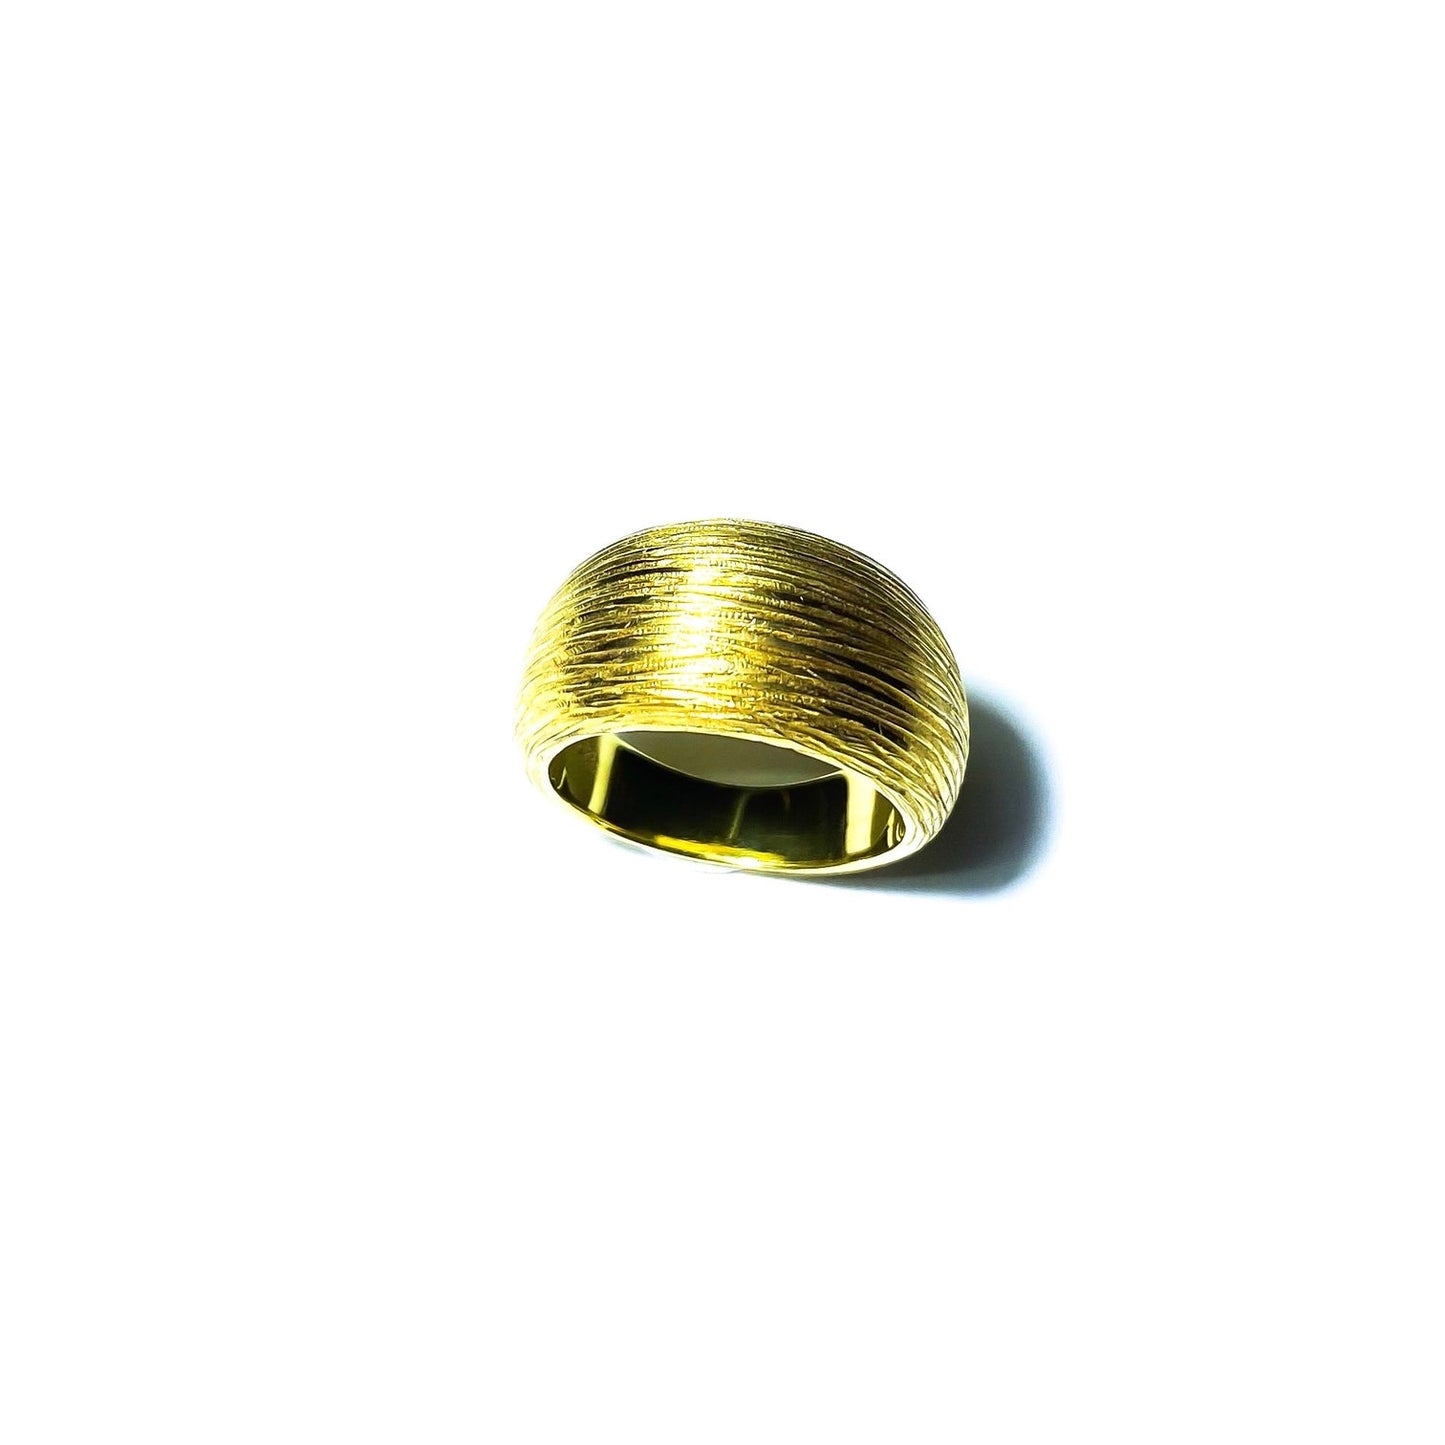 Bubble Signet gold plated silver ring, side view.